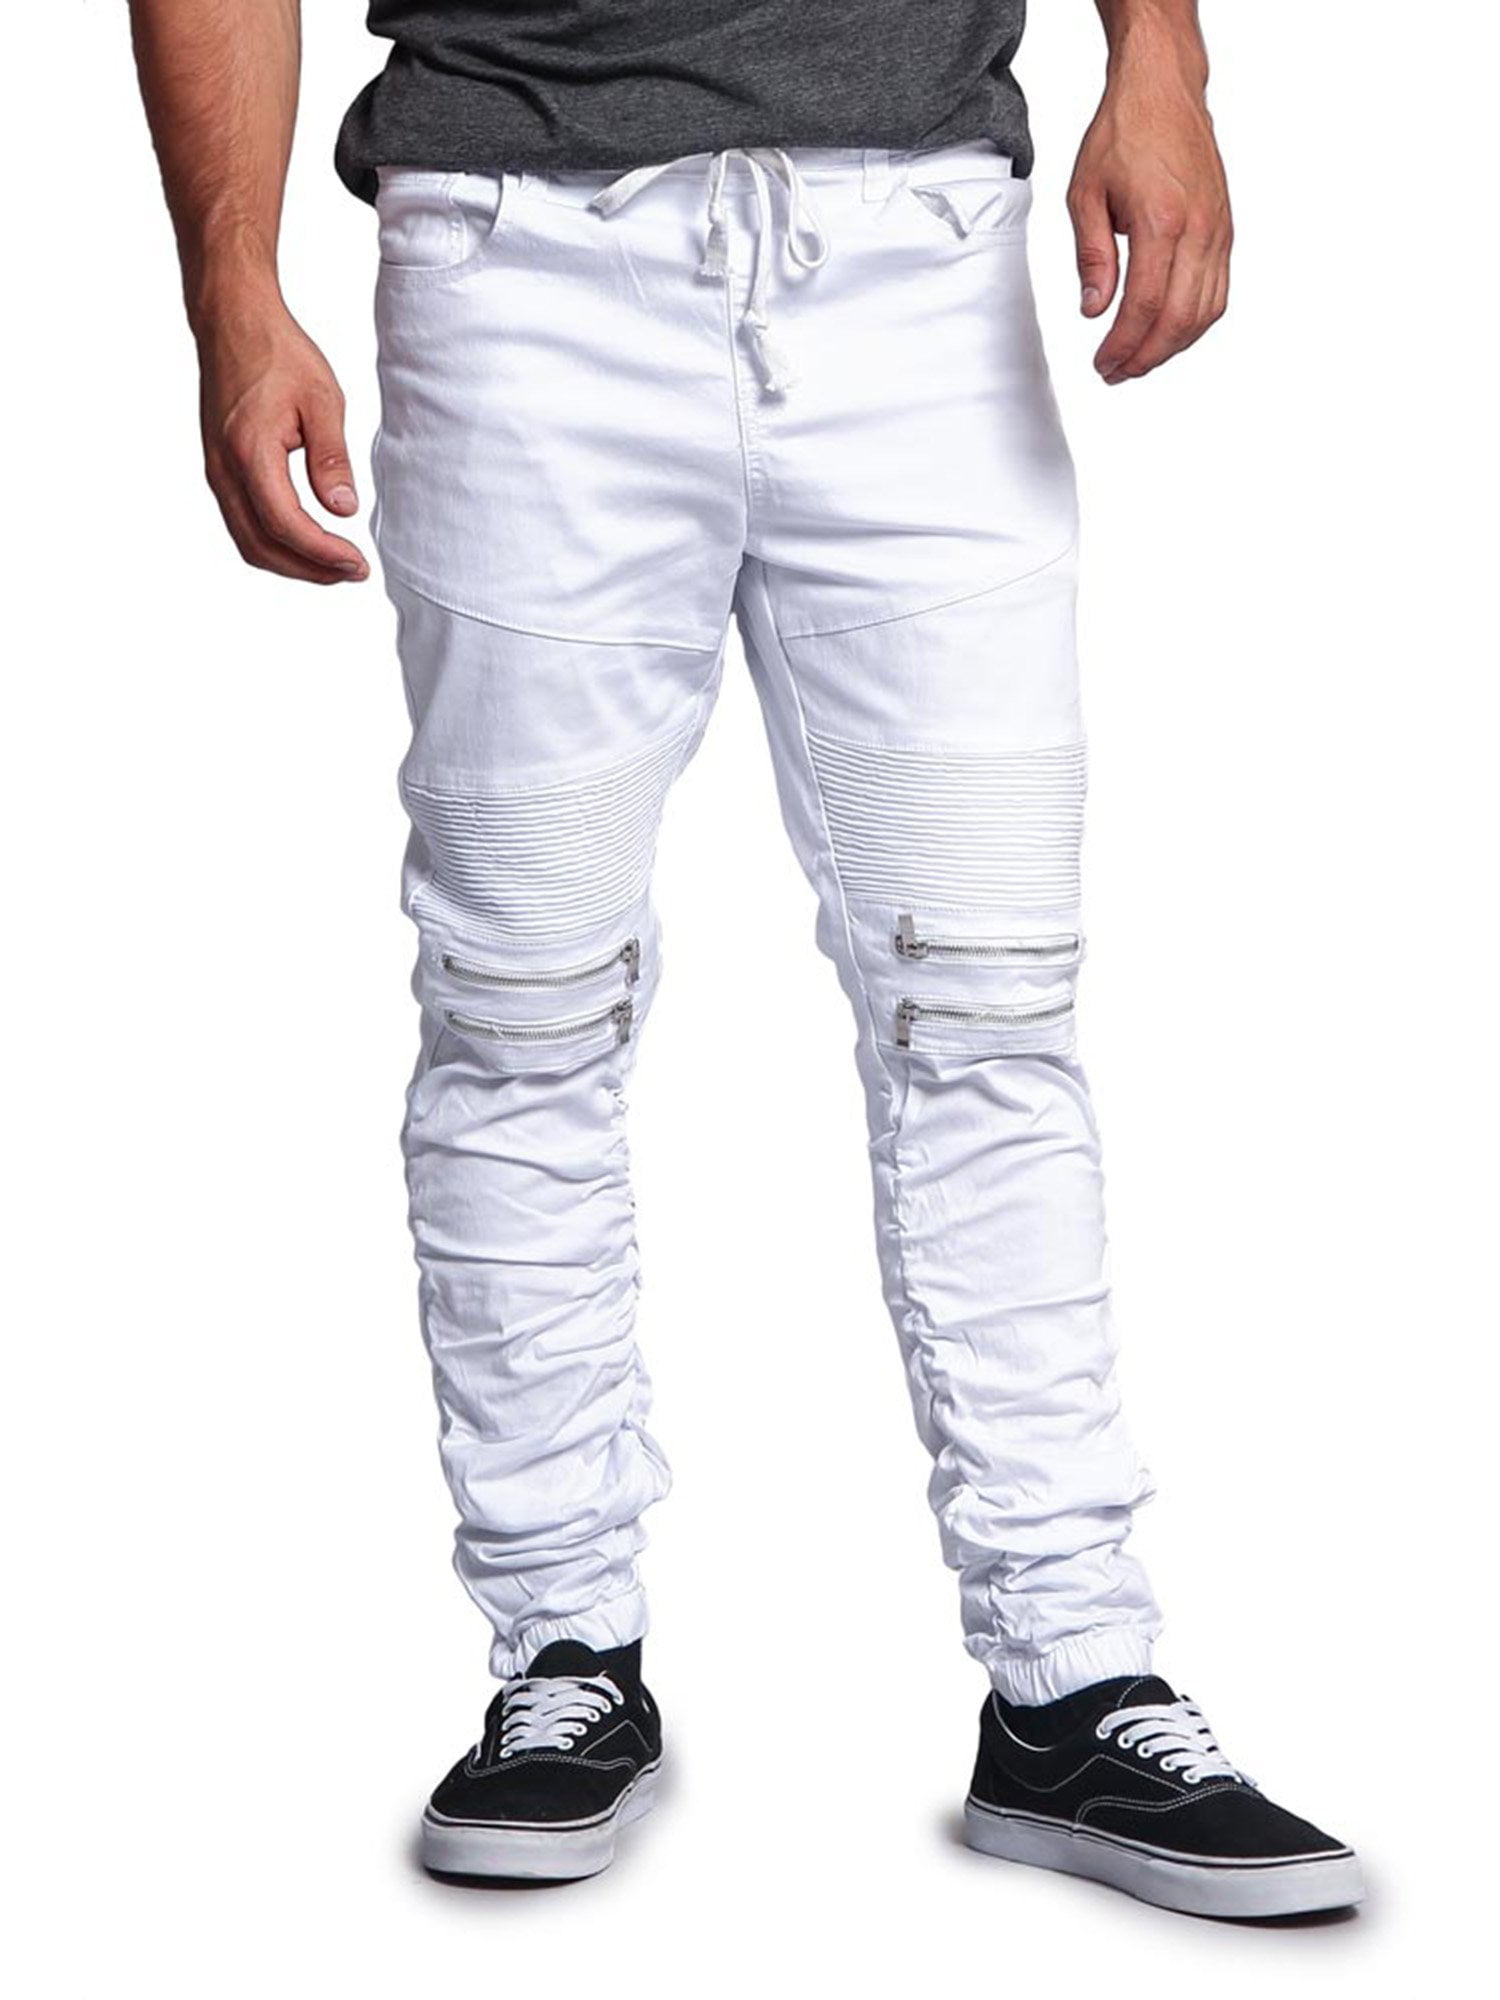 G-Style USA - Victorious Men's Scrunch Stacked Biker Twill Jogger Pants ...